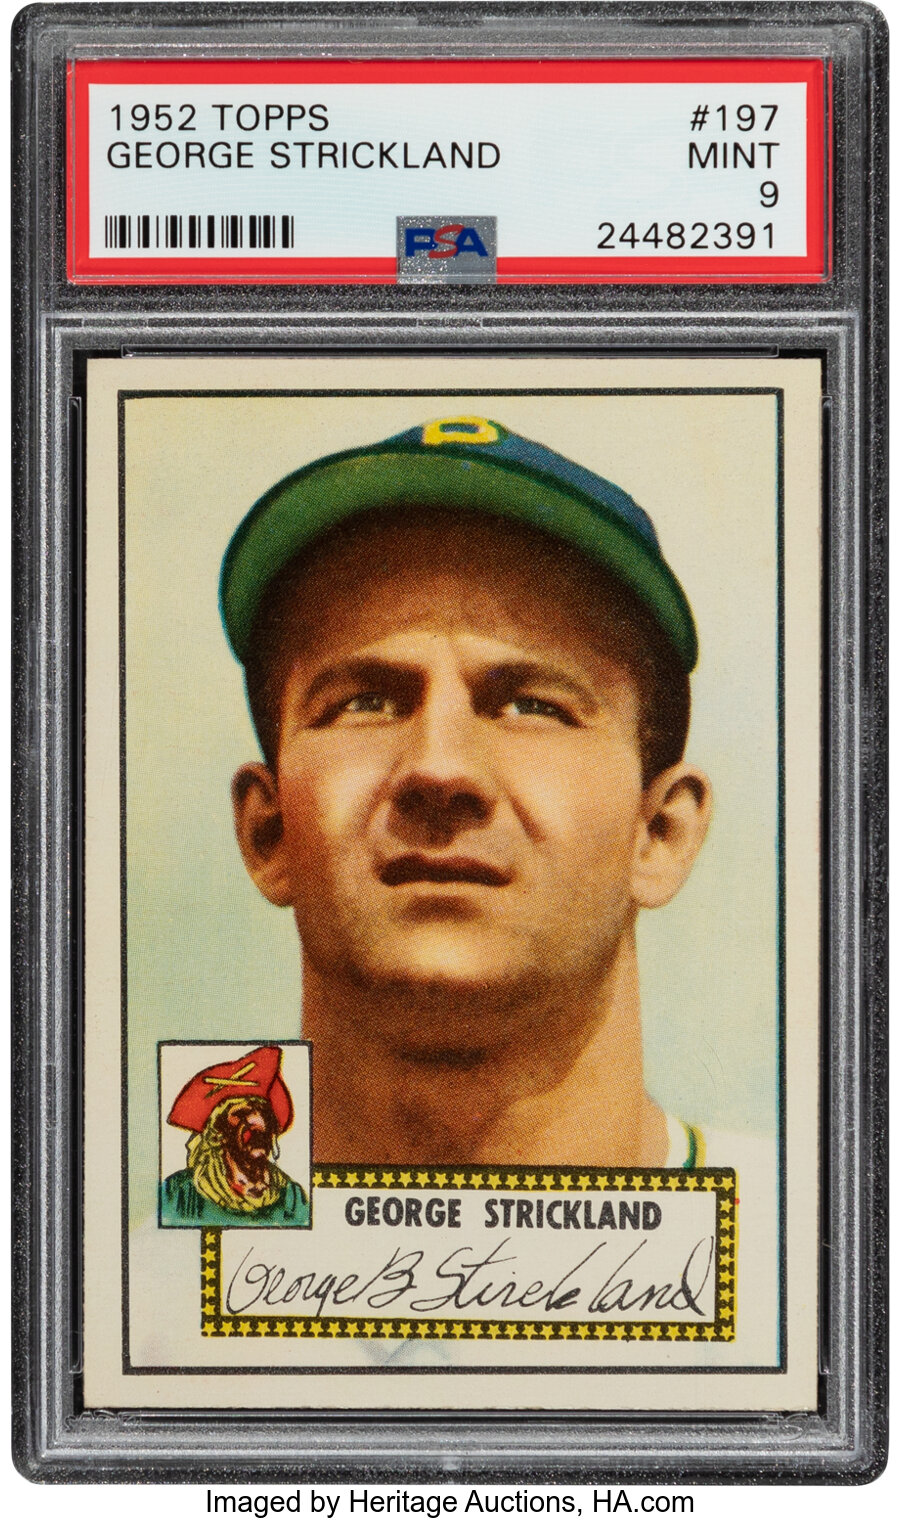 1952 Topps George Strickland #197 PSA Mint 9 - None Higher